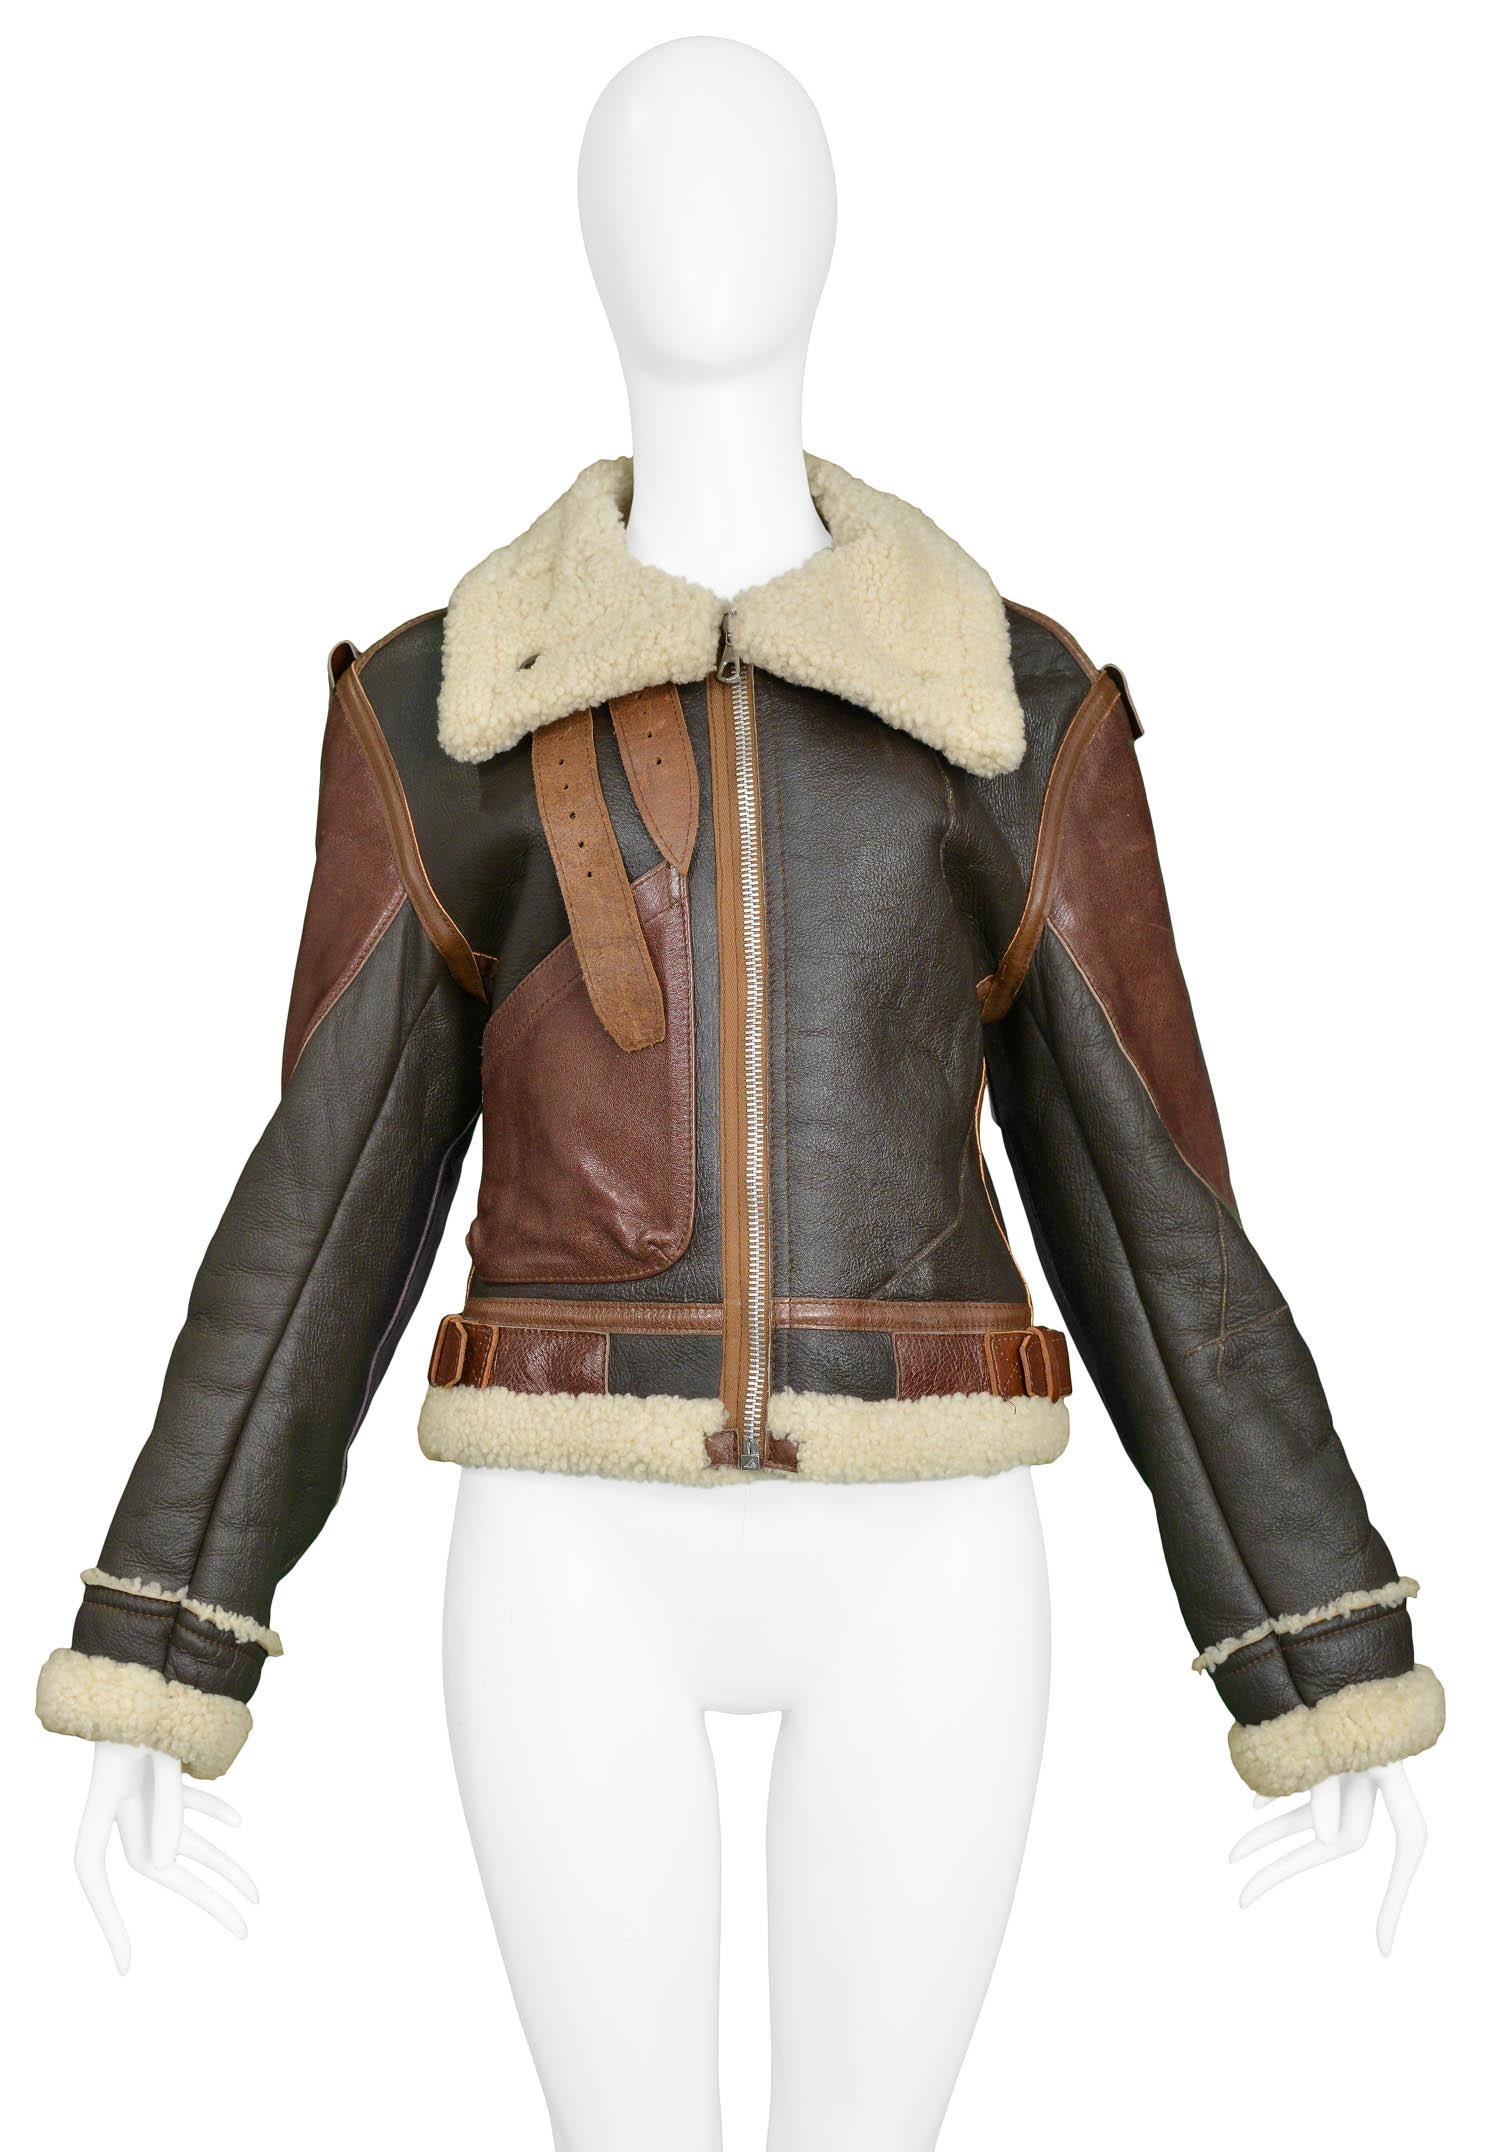 Vintage Nicolas Ghesquière for Balenciaga brown leather & cream shearling 'Palma' aviator jacket featuring buckle details throughout and paneling in various shades of brown. A runway piece from the Autumn/Winter 2003 Collection.

Excellent/Pristine